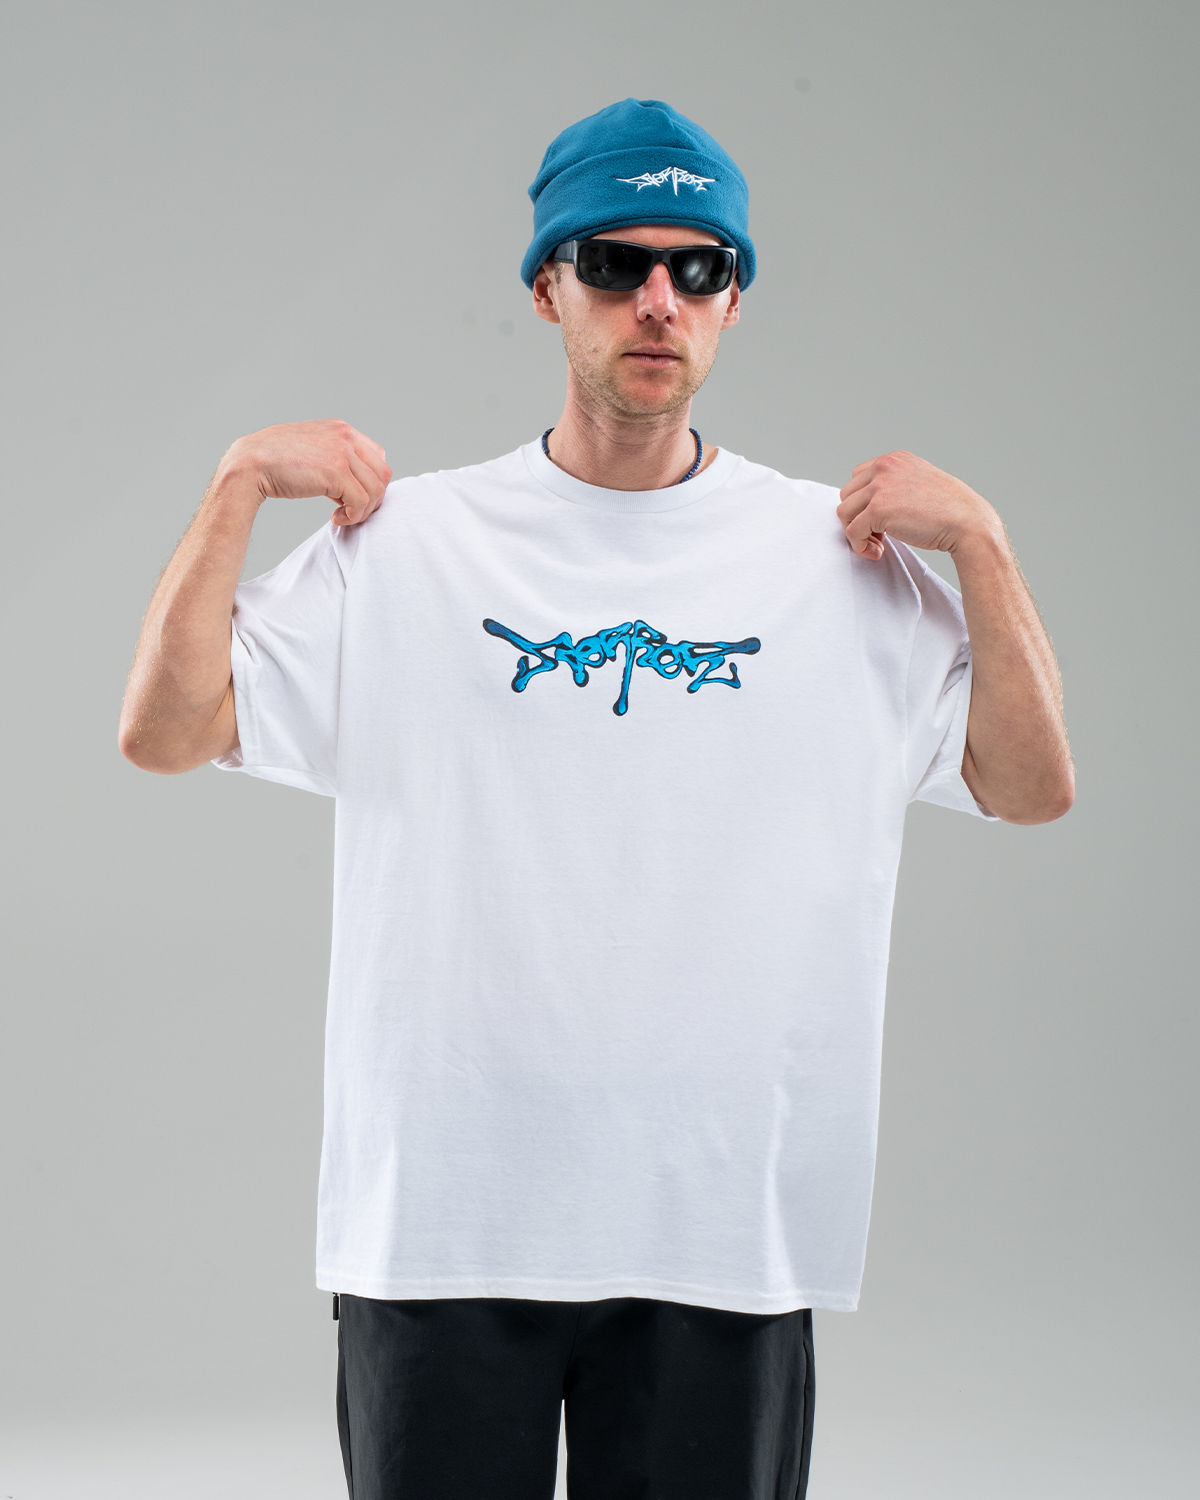 ICE T-SHIRT | STORROR | parkour clothing & technical sportswear